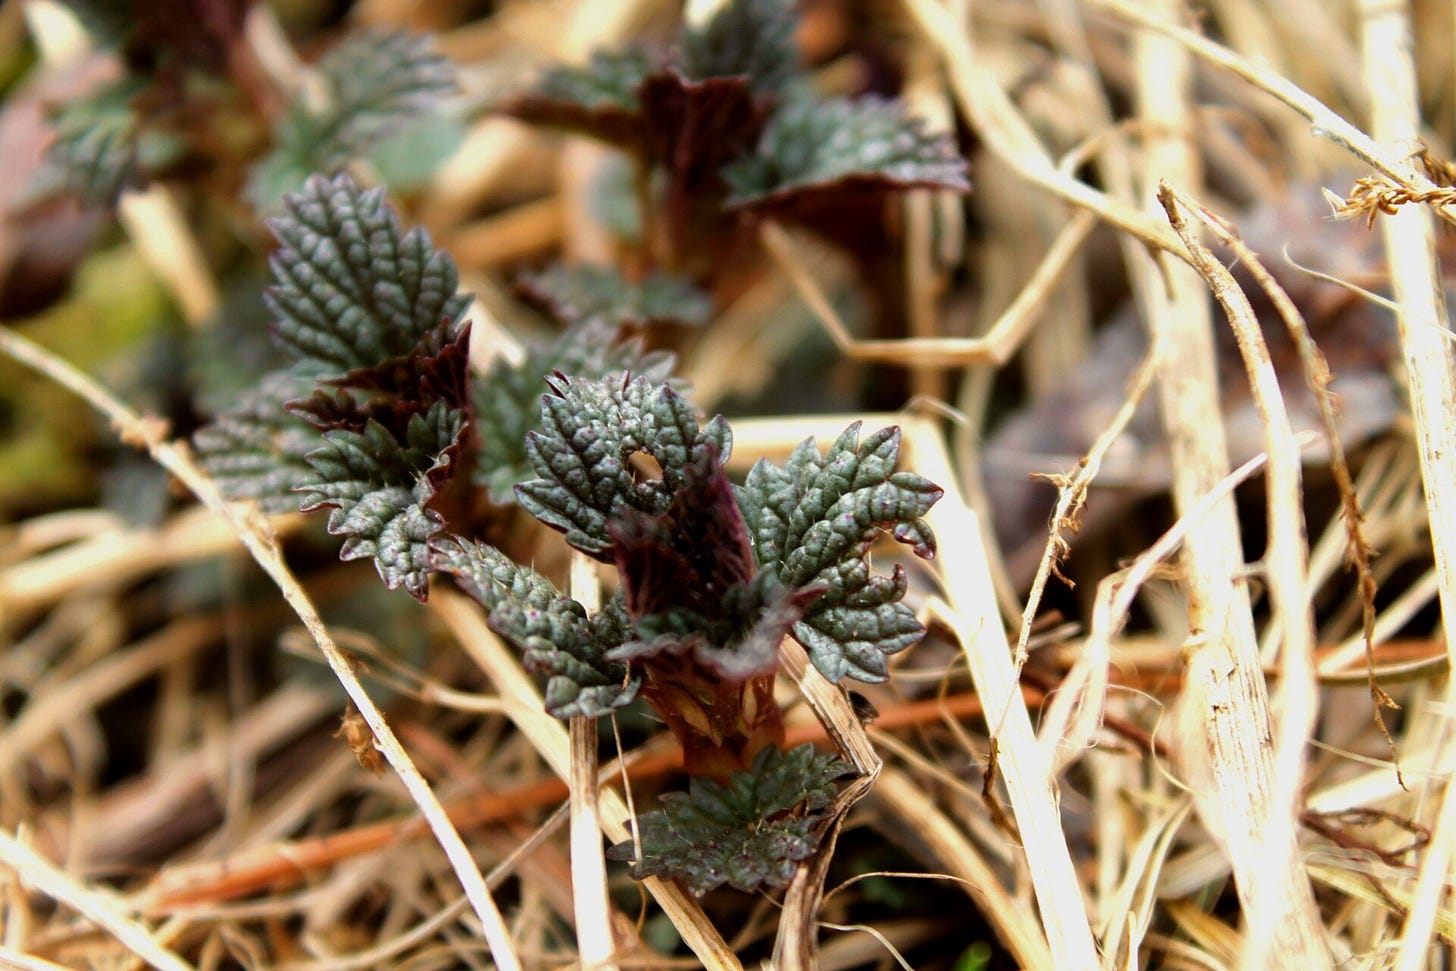 Nettle often emerges in the spring looking purple, due to a naturally occurring plant “anti-freeze”.